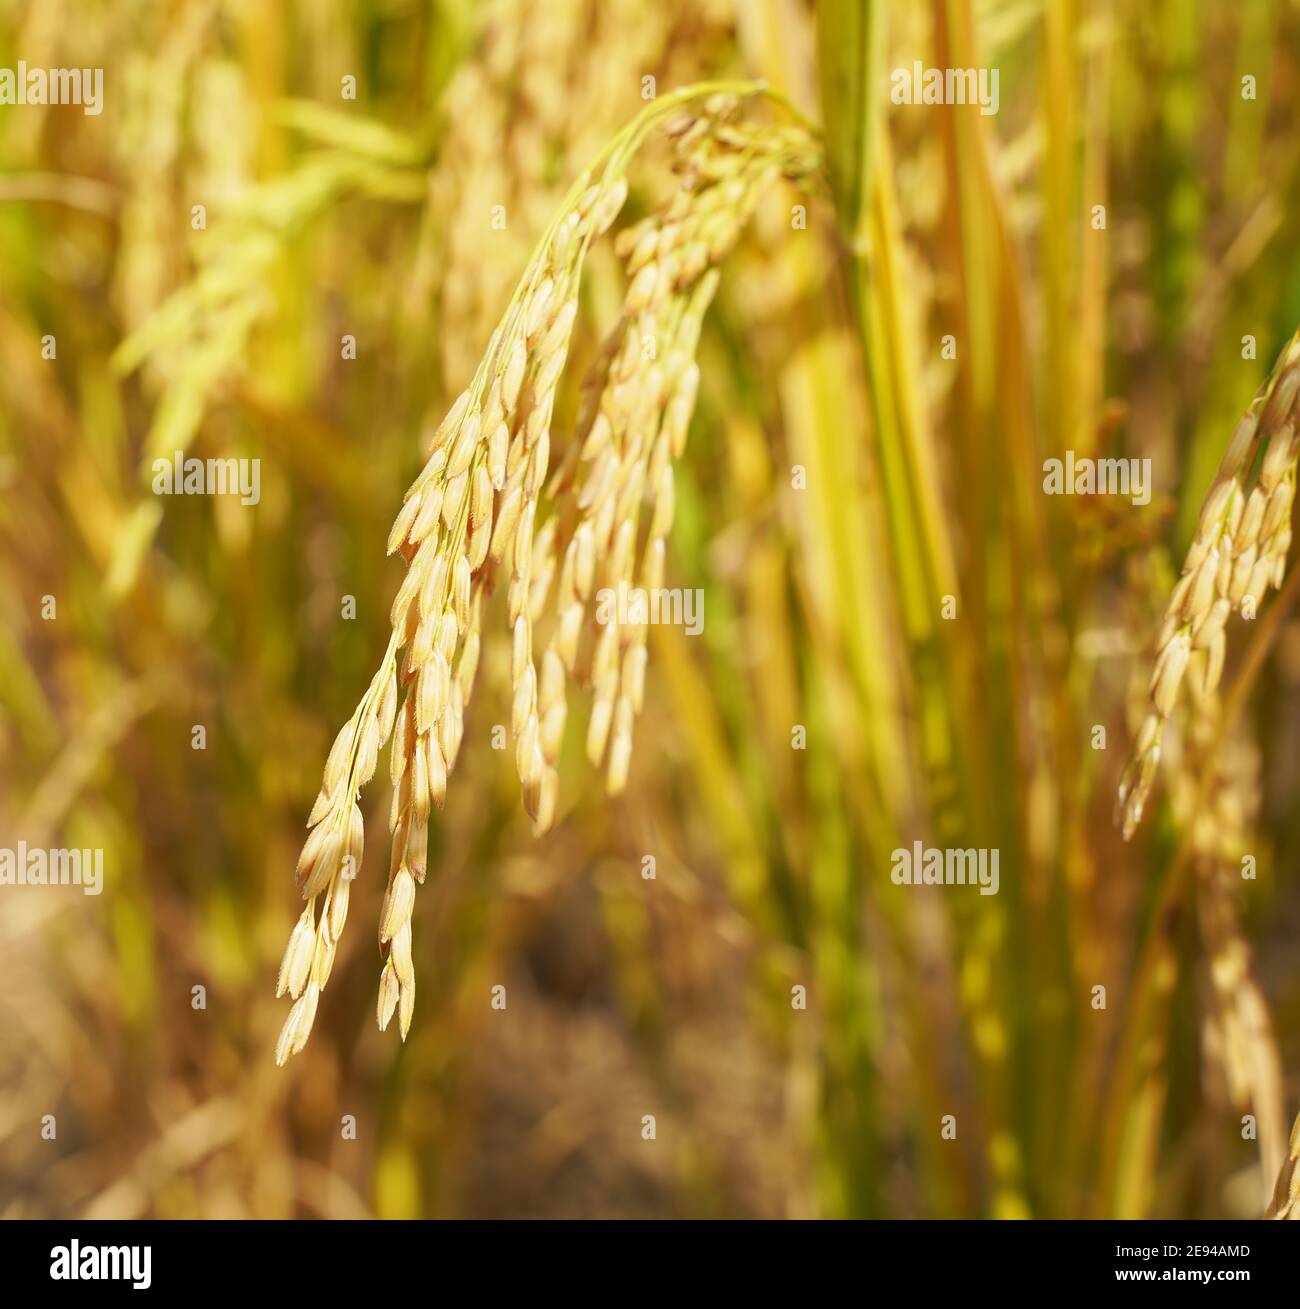 Rice field on rice paddy green color lush growing is a agriculture Stock Photo